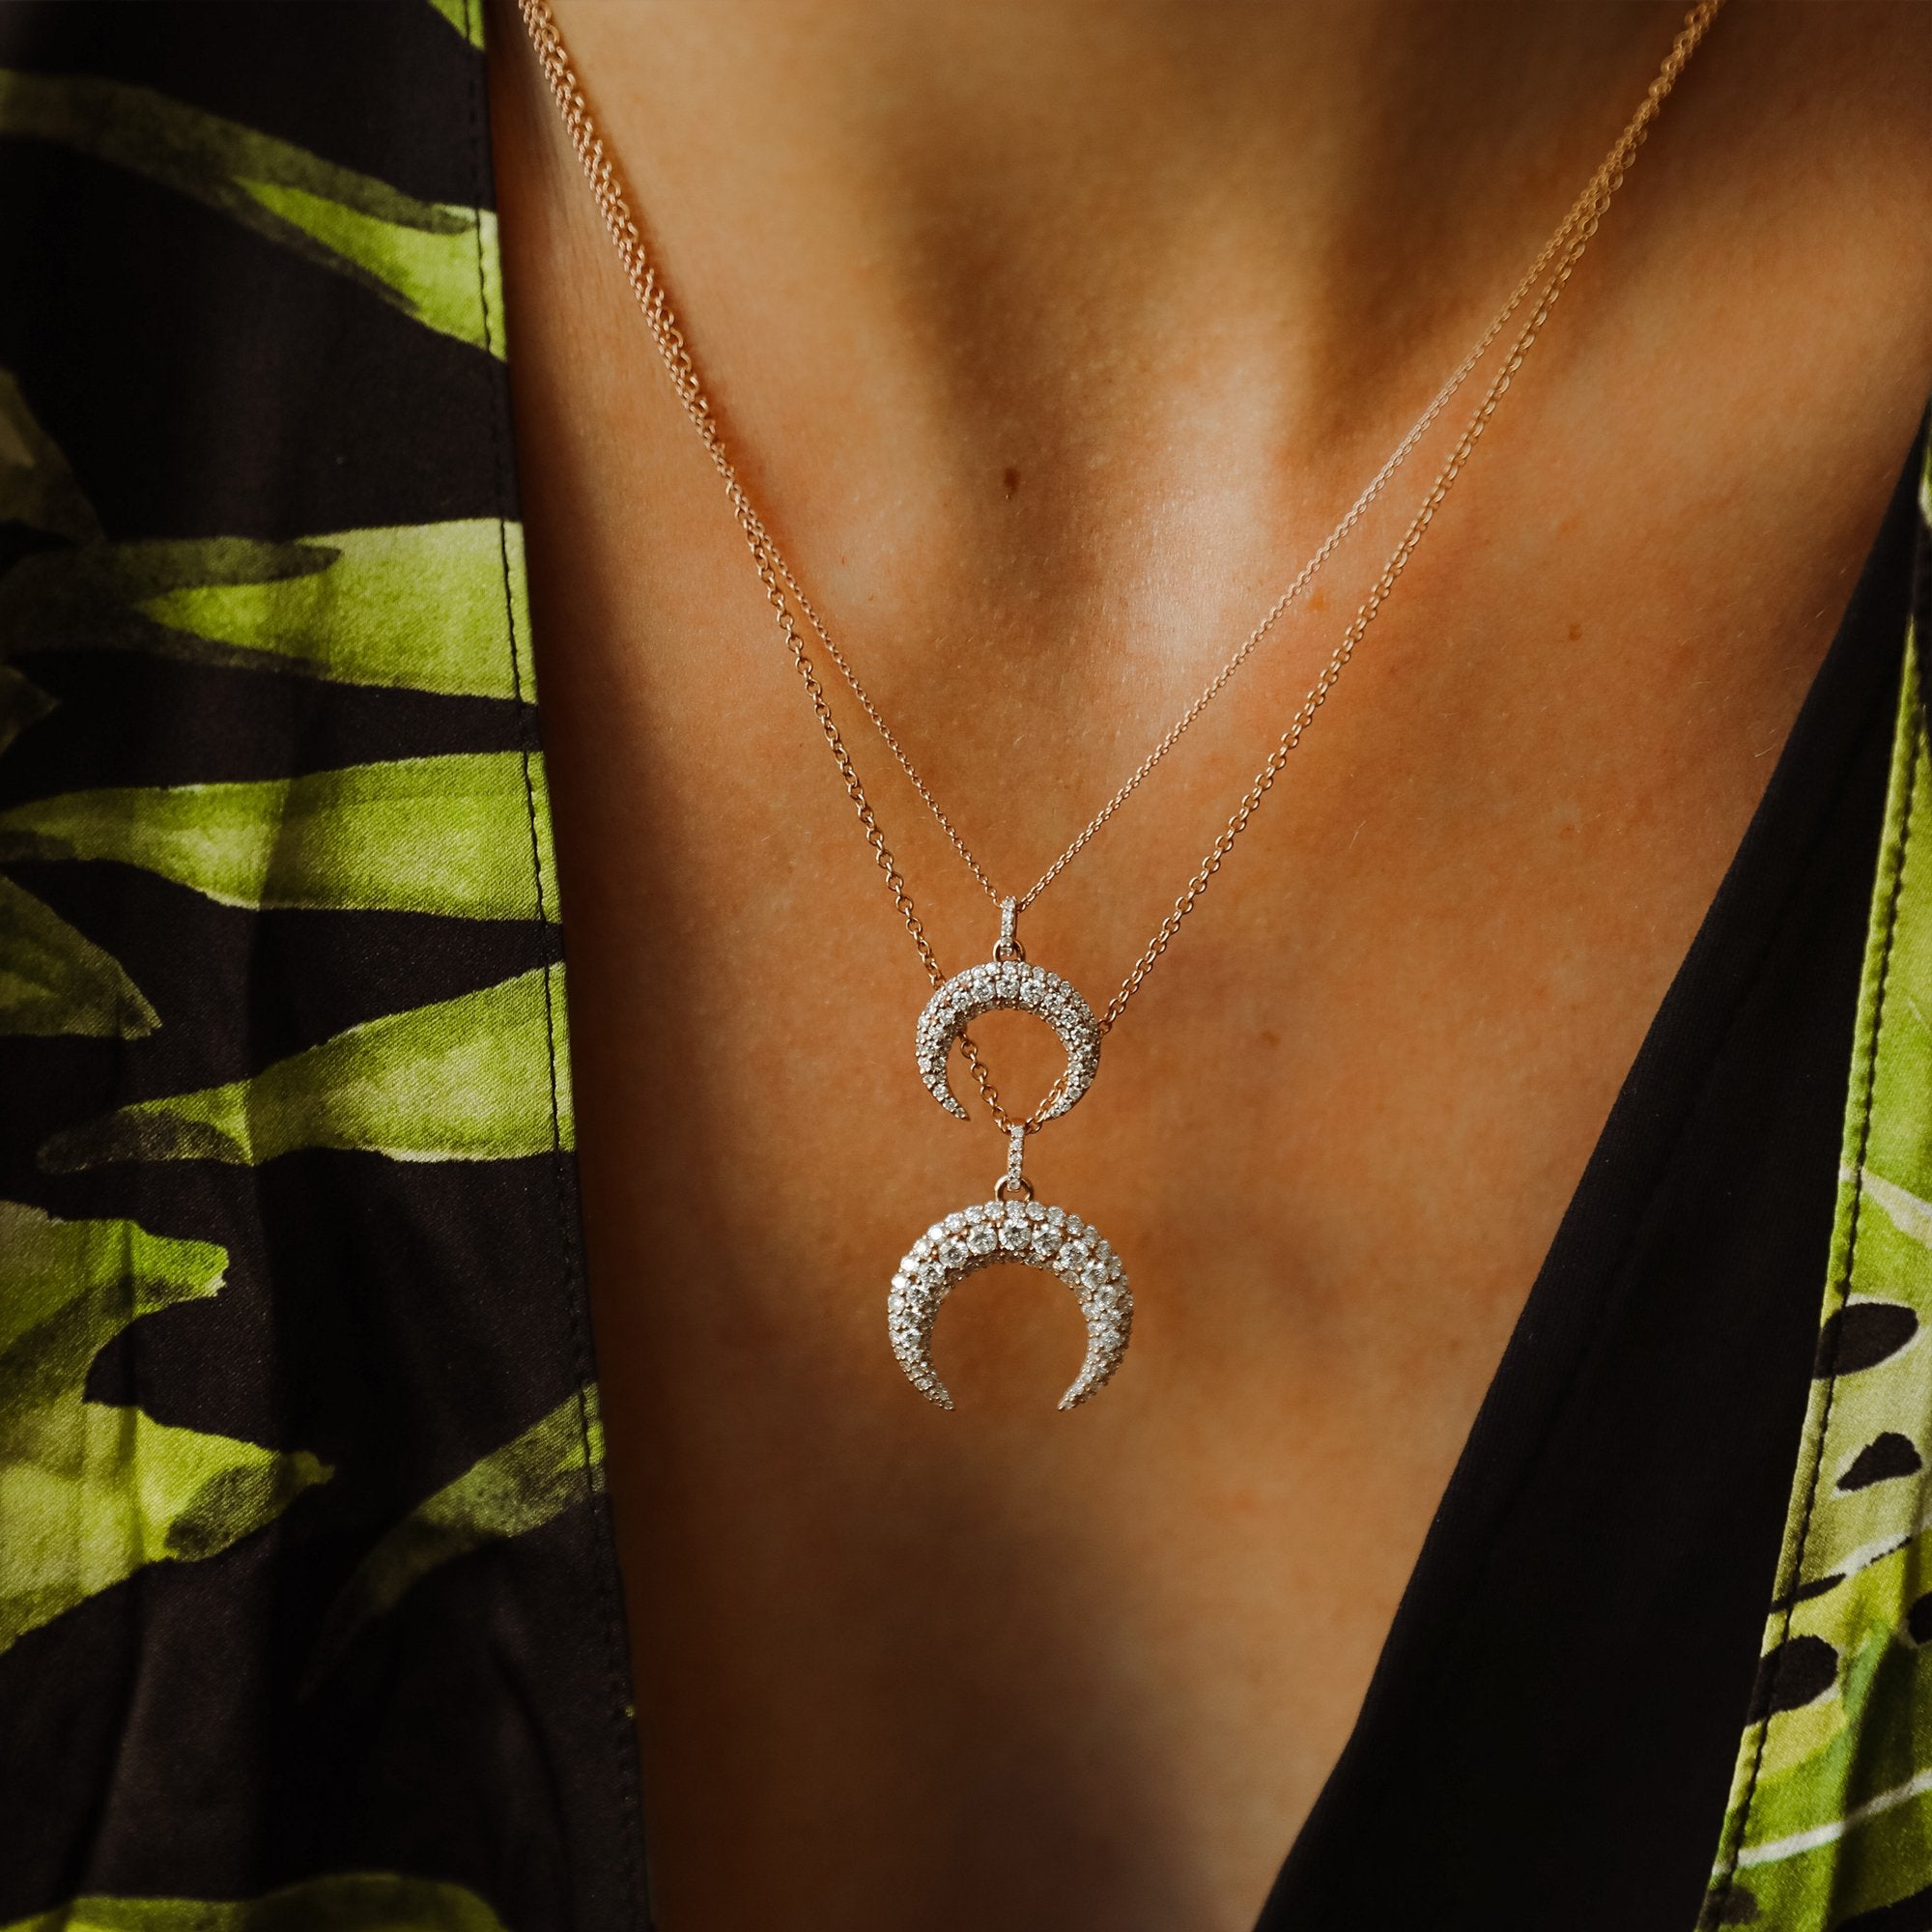 The Mini Diamond Dharma shown paired with the Diamond Dharma Necklace. Both necklaces are rose gold.